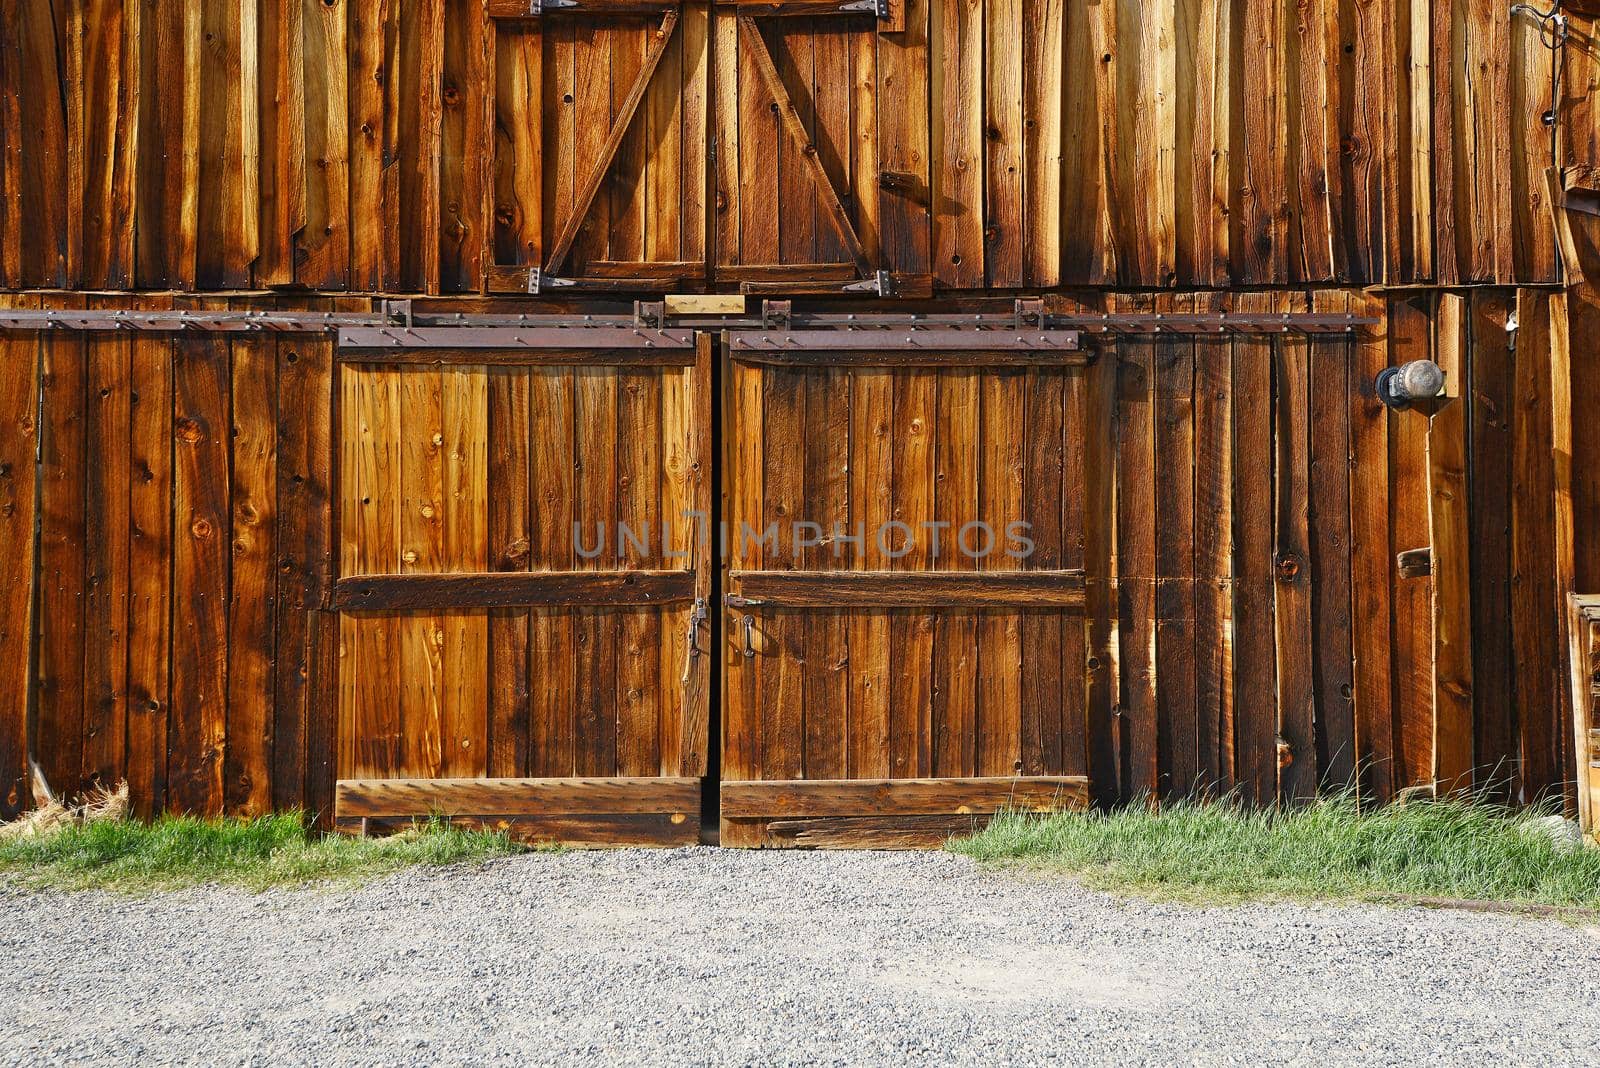 a wooden wall in Bodie historic state park of a ghost town from a gold rush era in Sierra Nevada